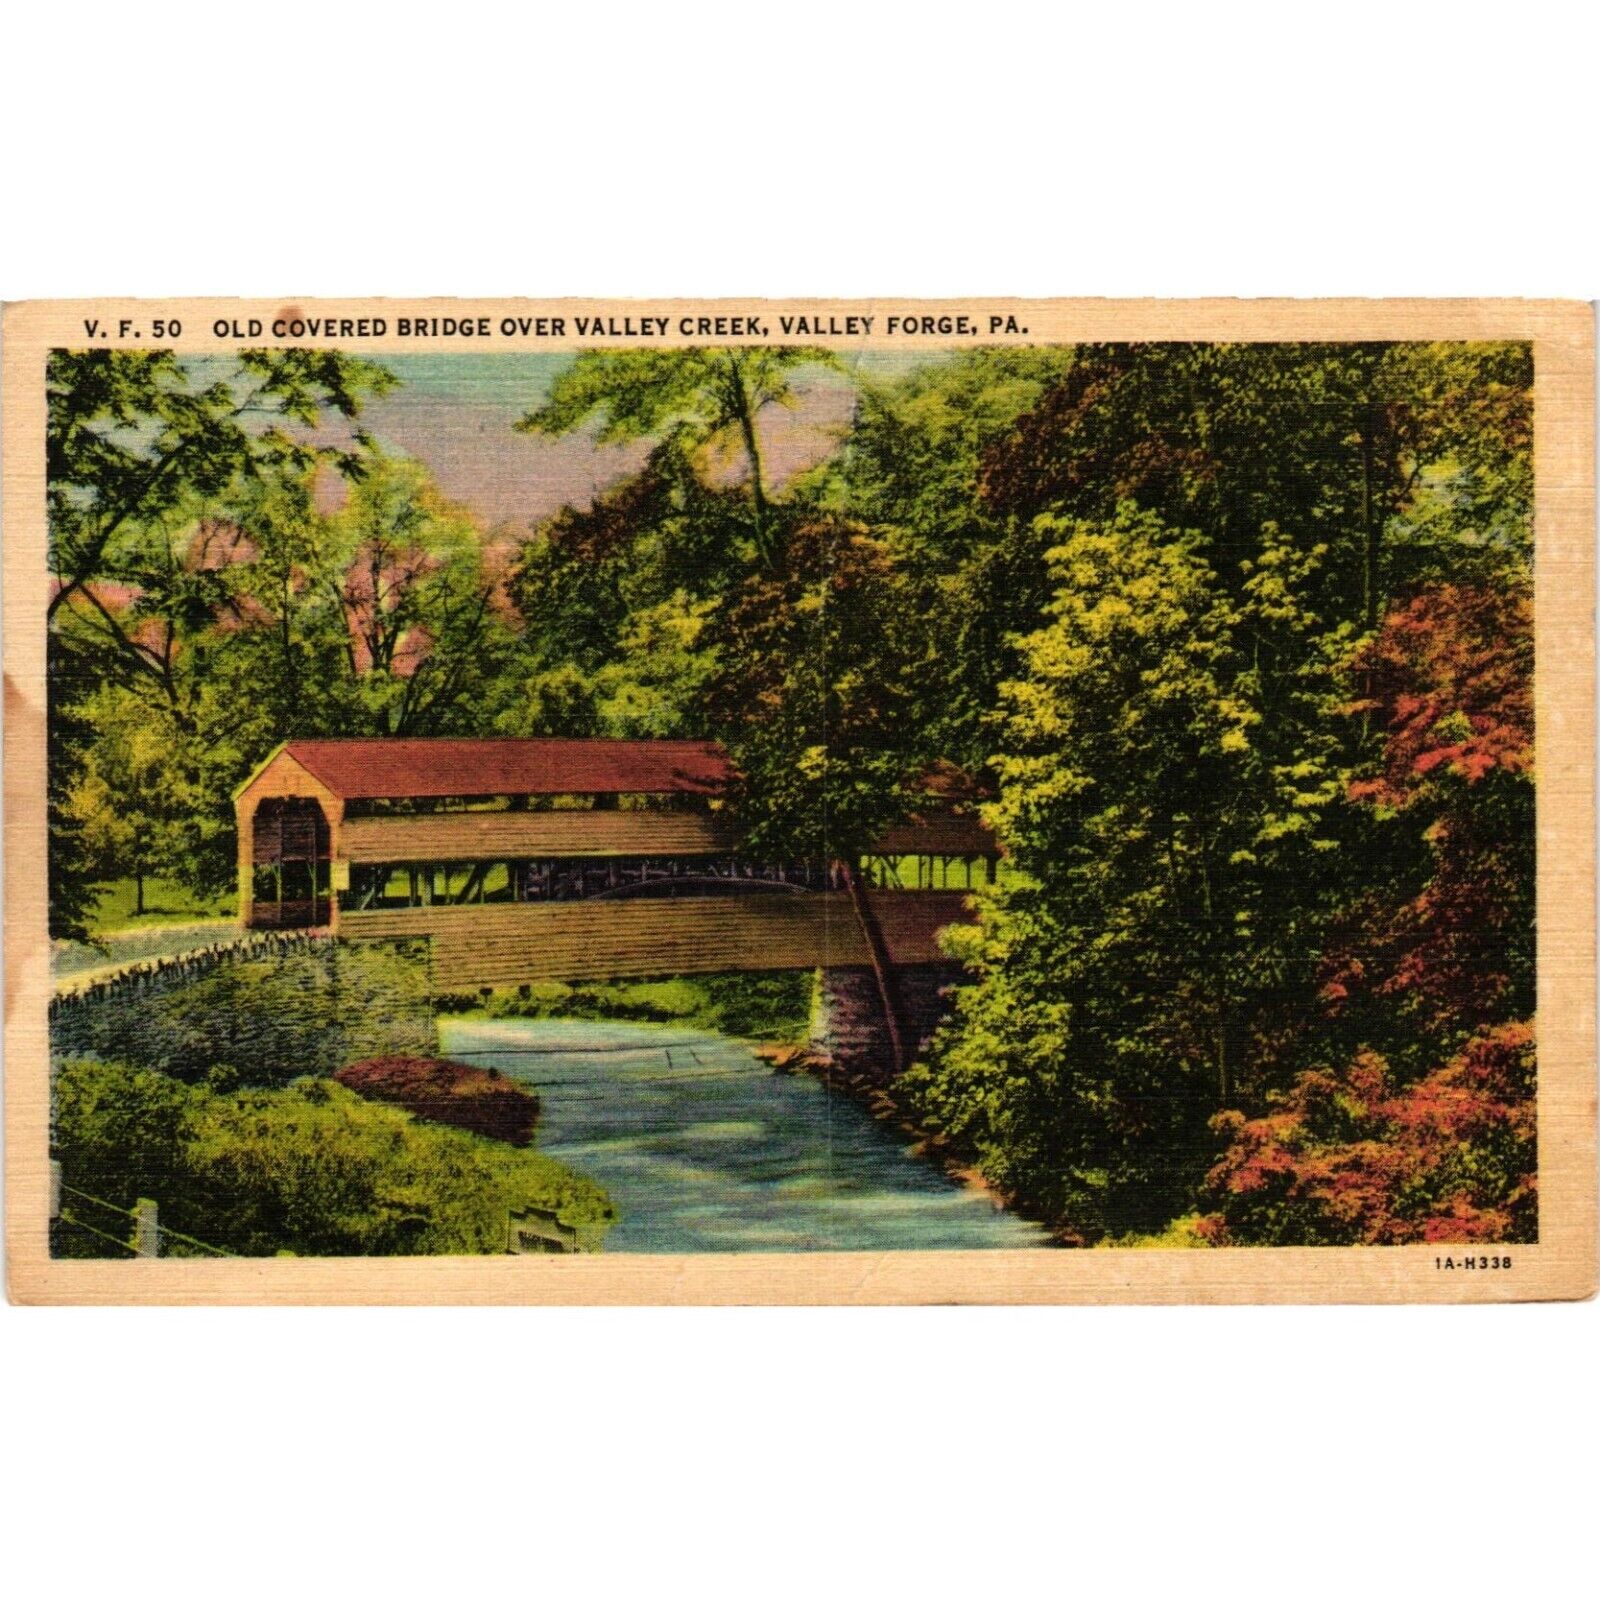 Pennsylvania Valley Force Covered Bridge Postcards 1950s Travel Souvenir Posted